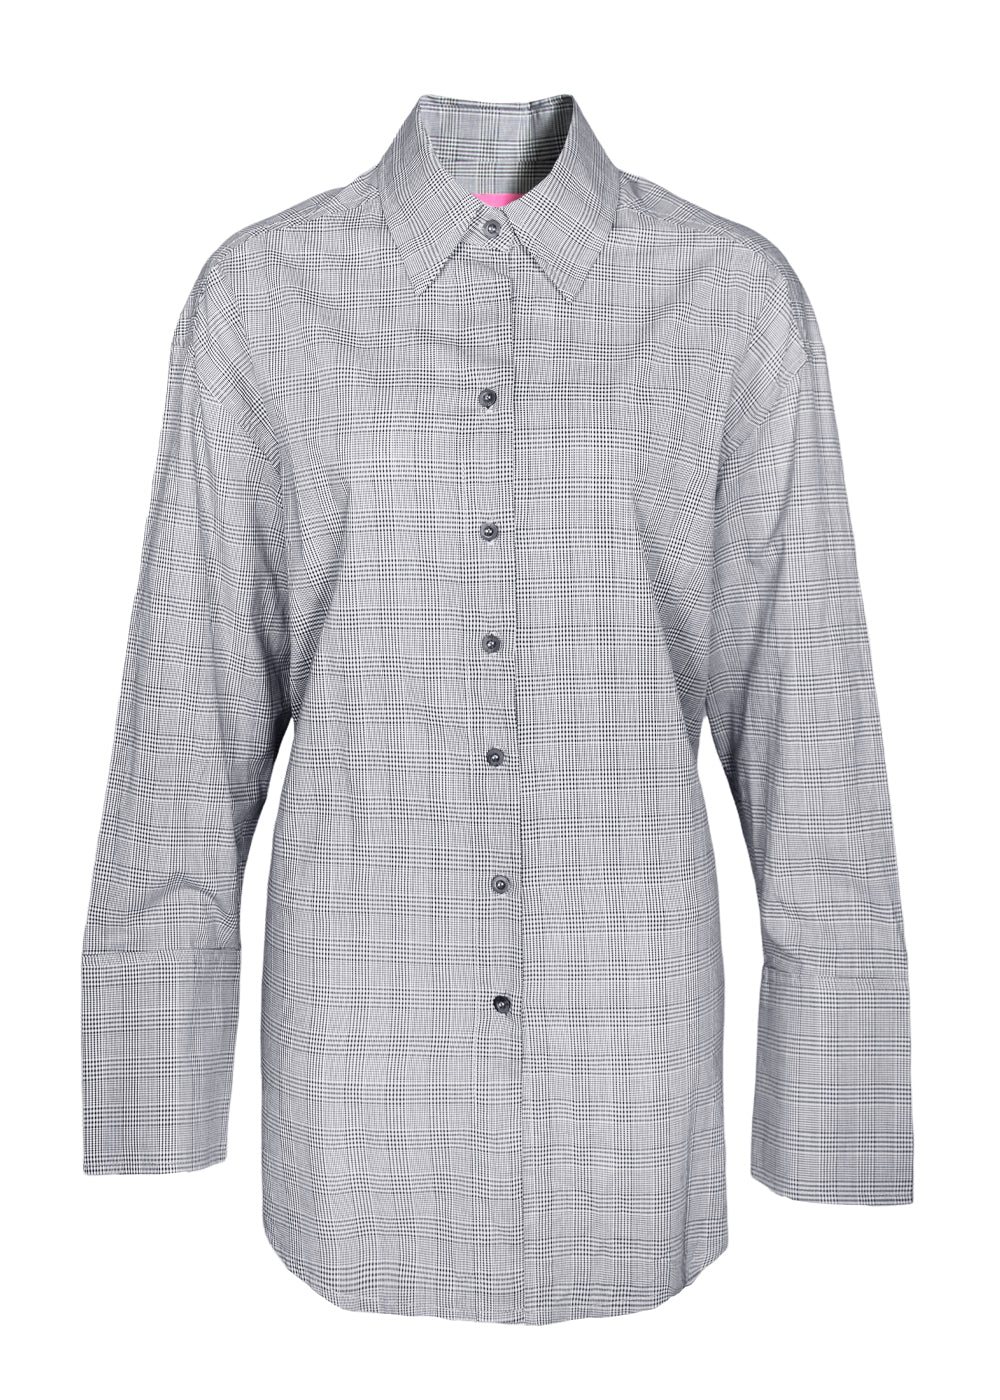 Ultimate Shirt- Houndstooth